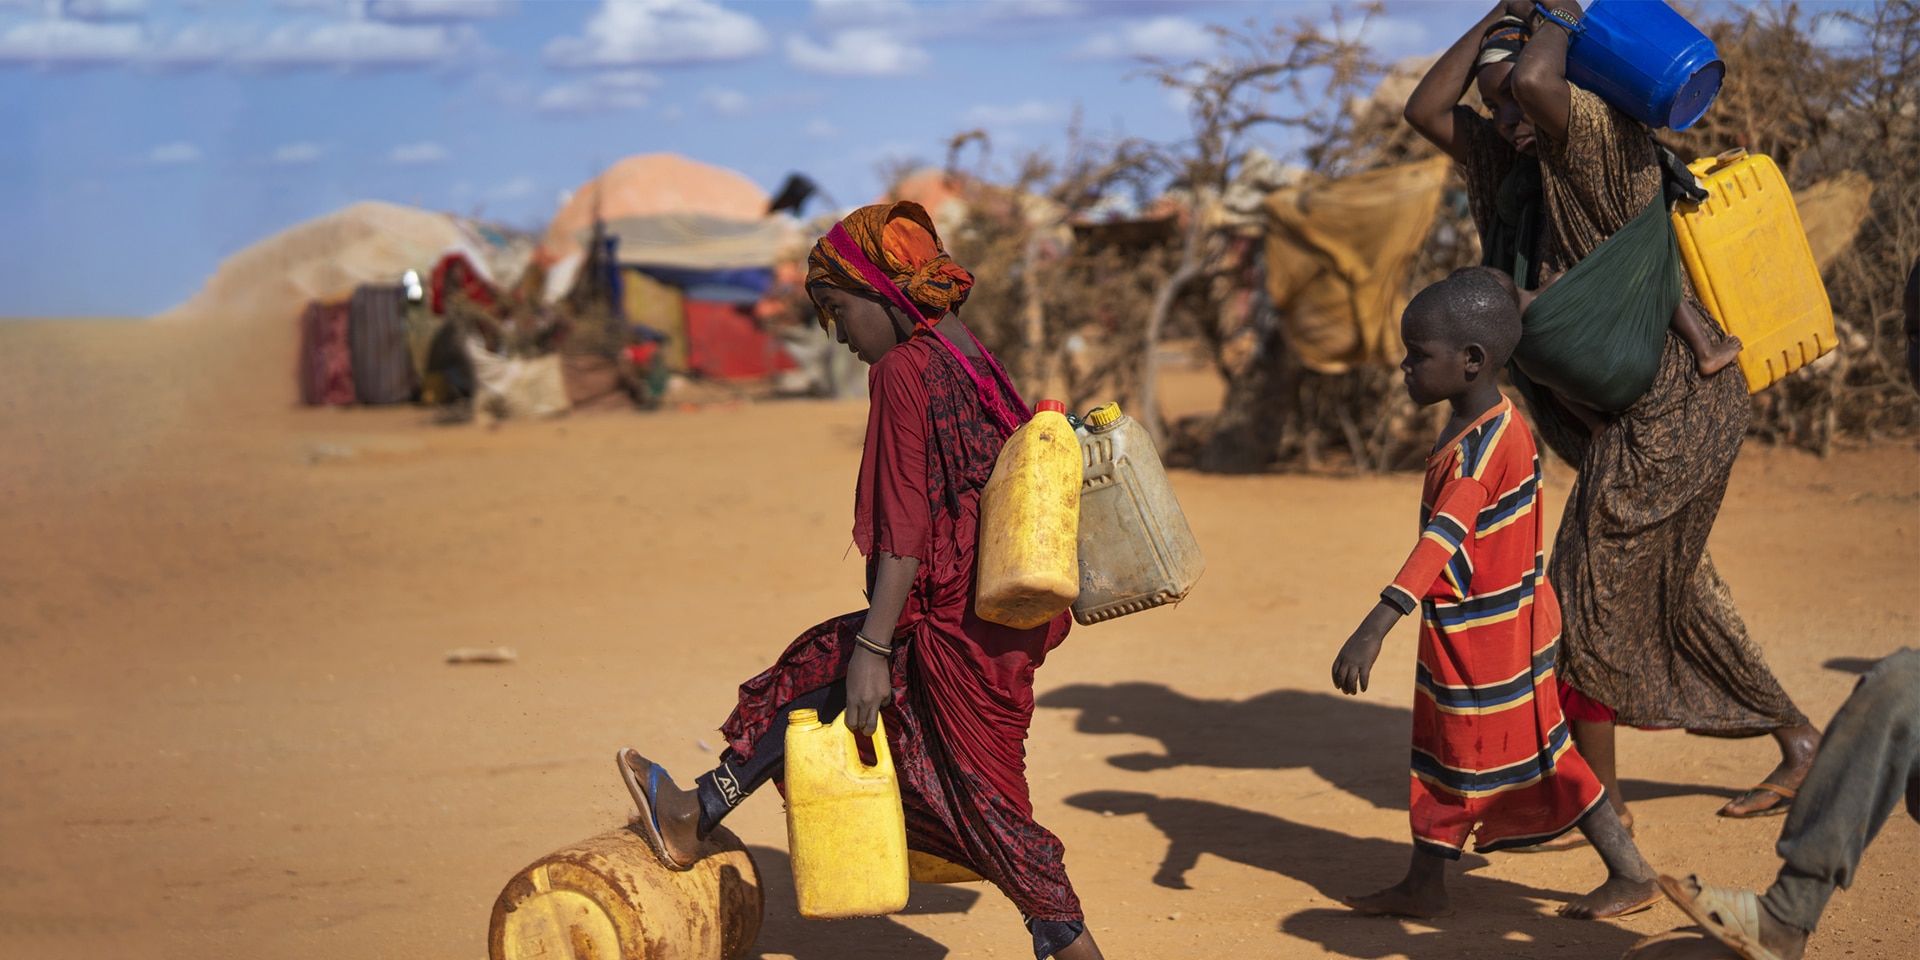 Women and children carry water canisters through a village of simple huts in Somalia.